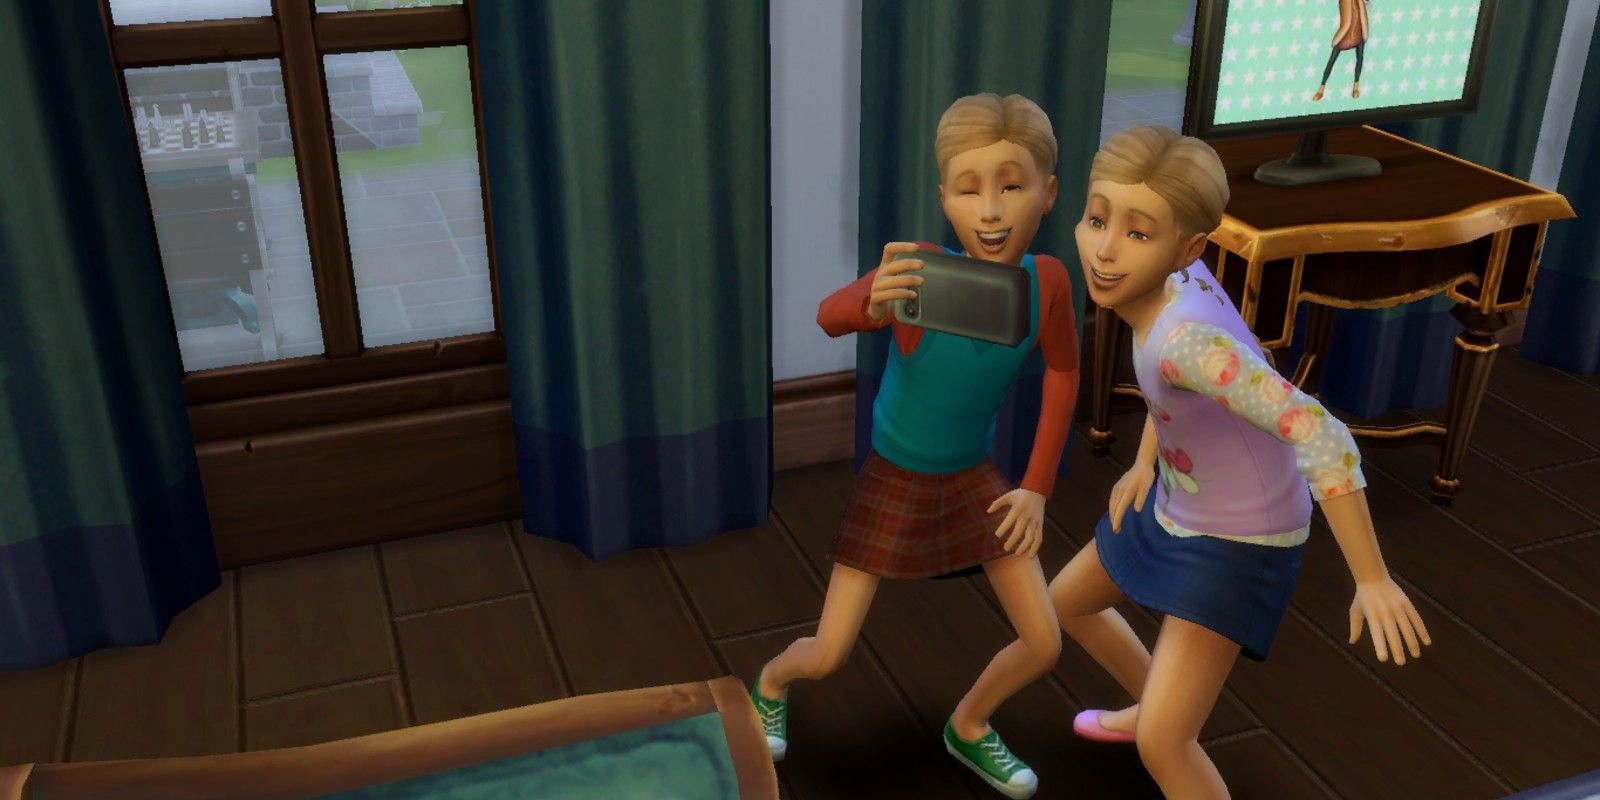 Sims 4' Pregnancy Cheats: How To Force Twins, Induce Labor & Age Up